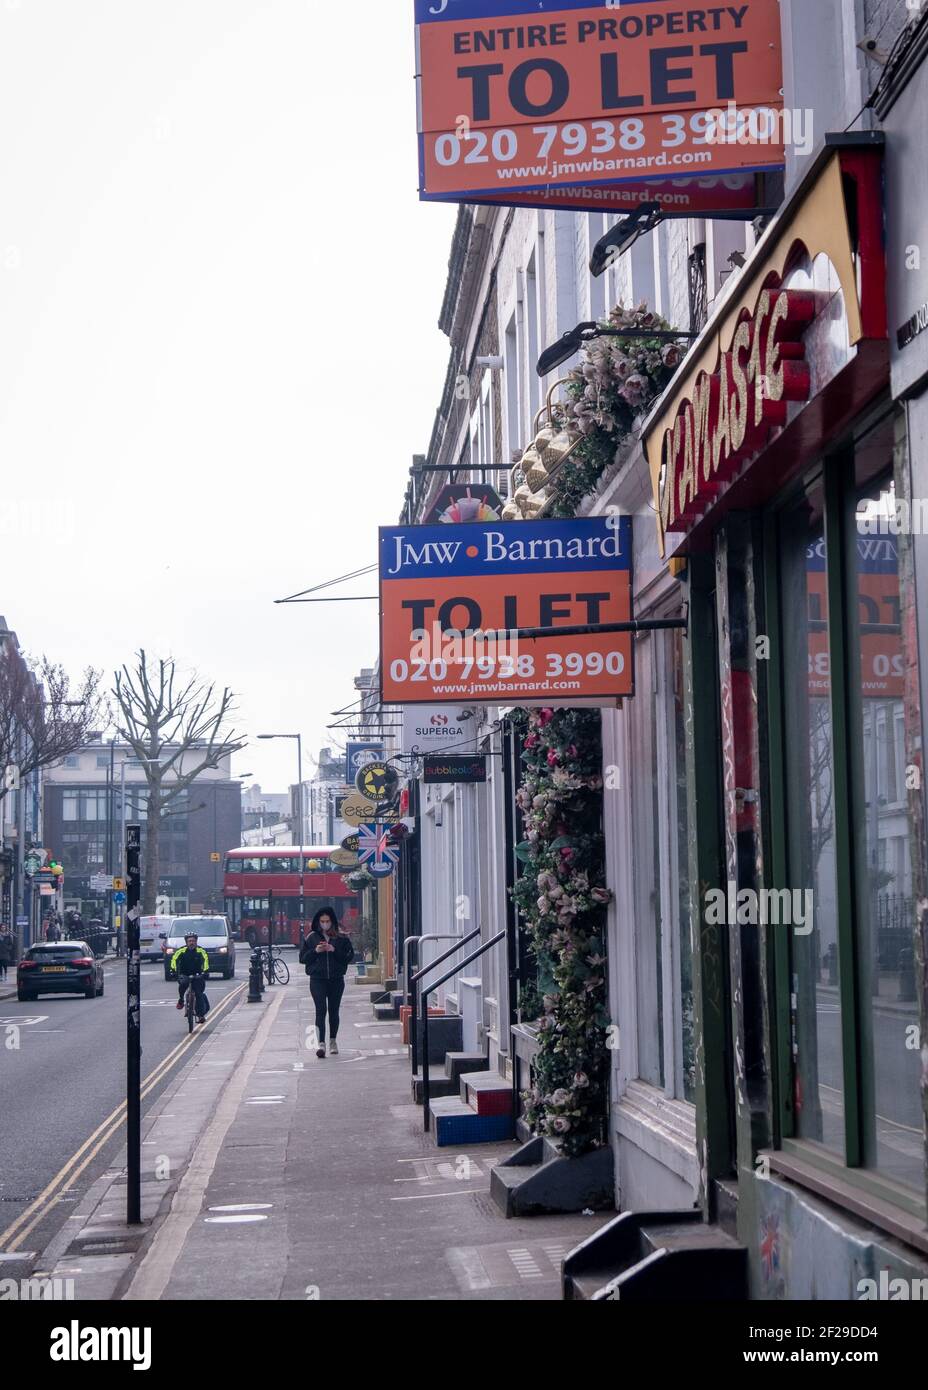 London- March 2021: Shop to Let sign on side of vacant retail business in Notting Hill, west London Stock Photo